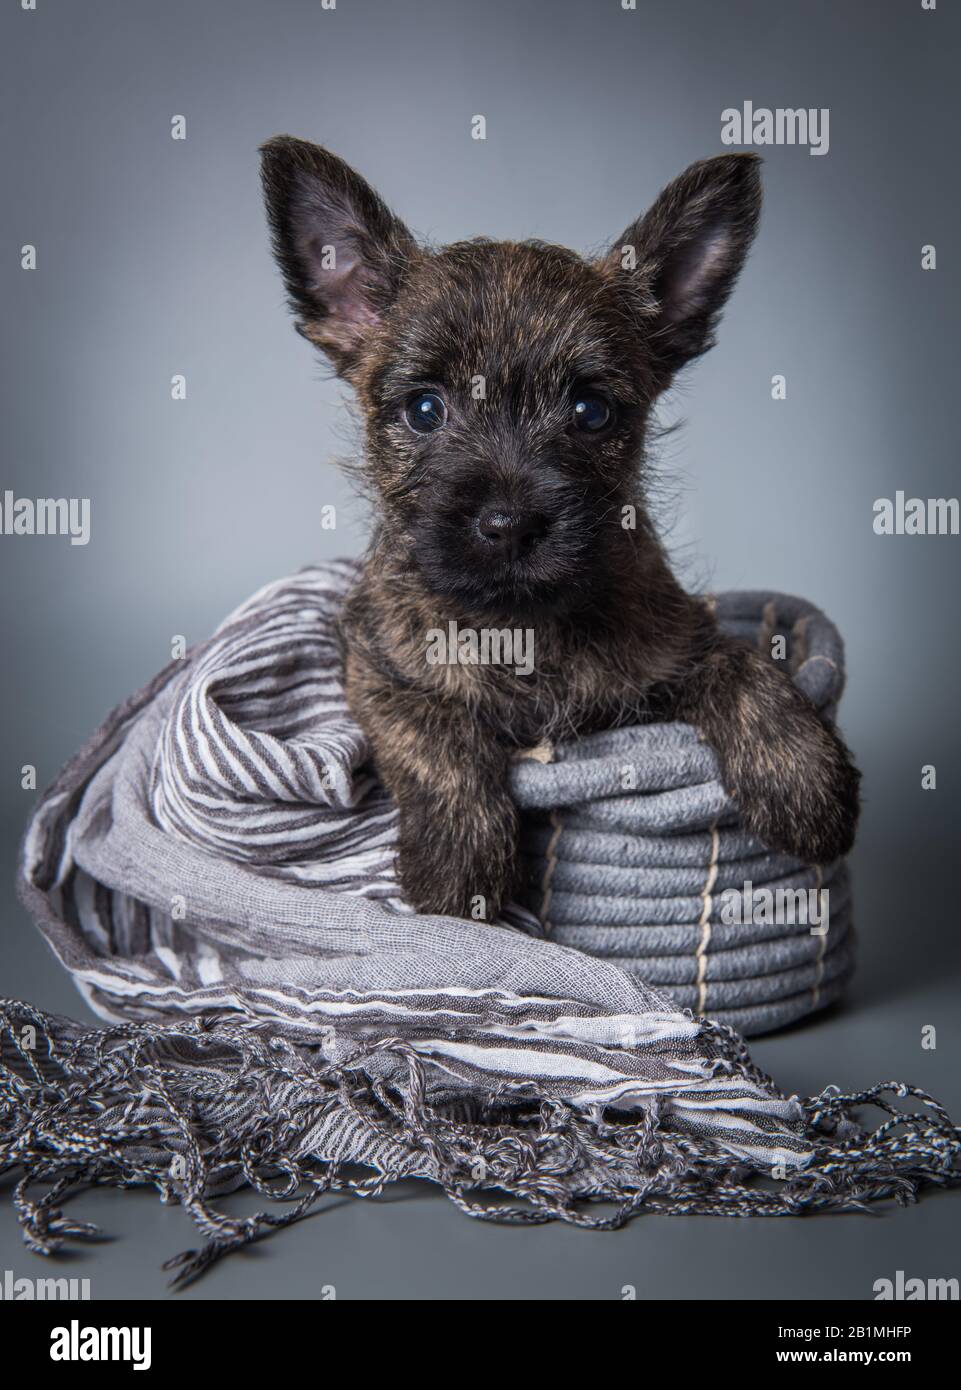 Cairn Terrier puppy dog on gray background Stock Photo